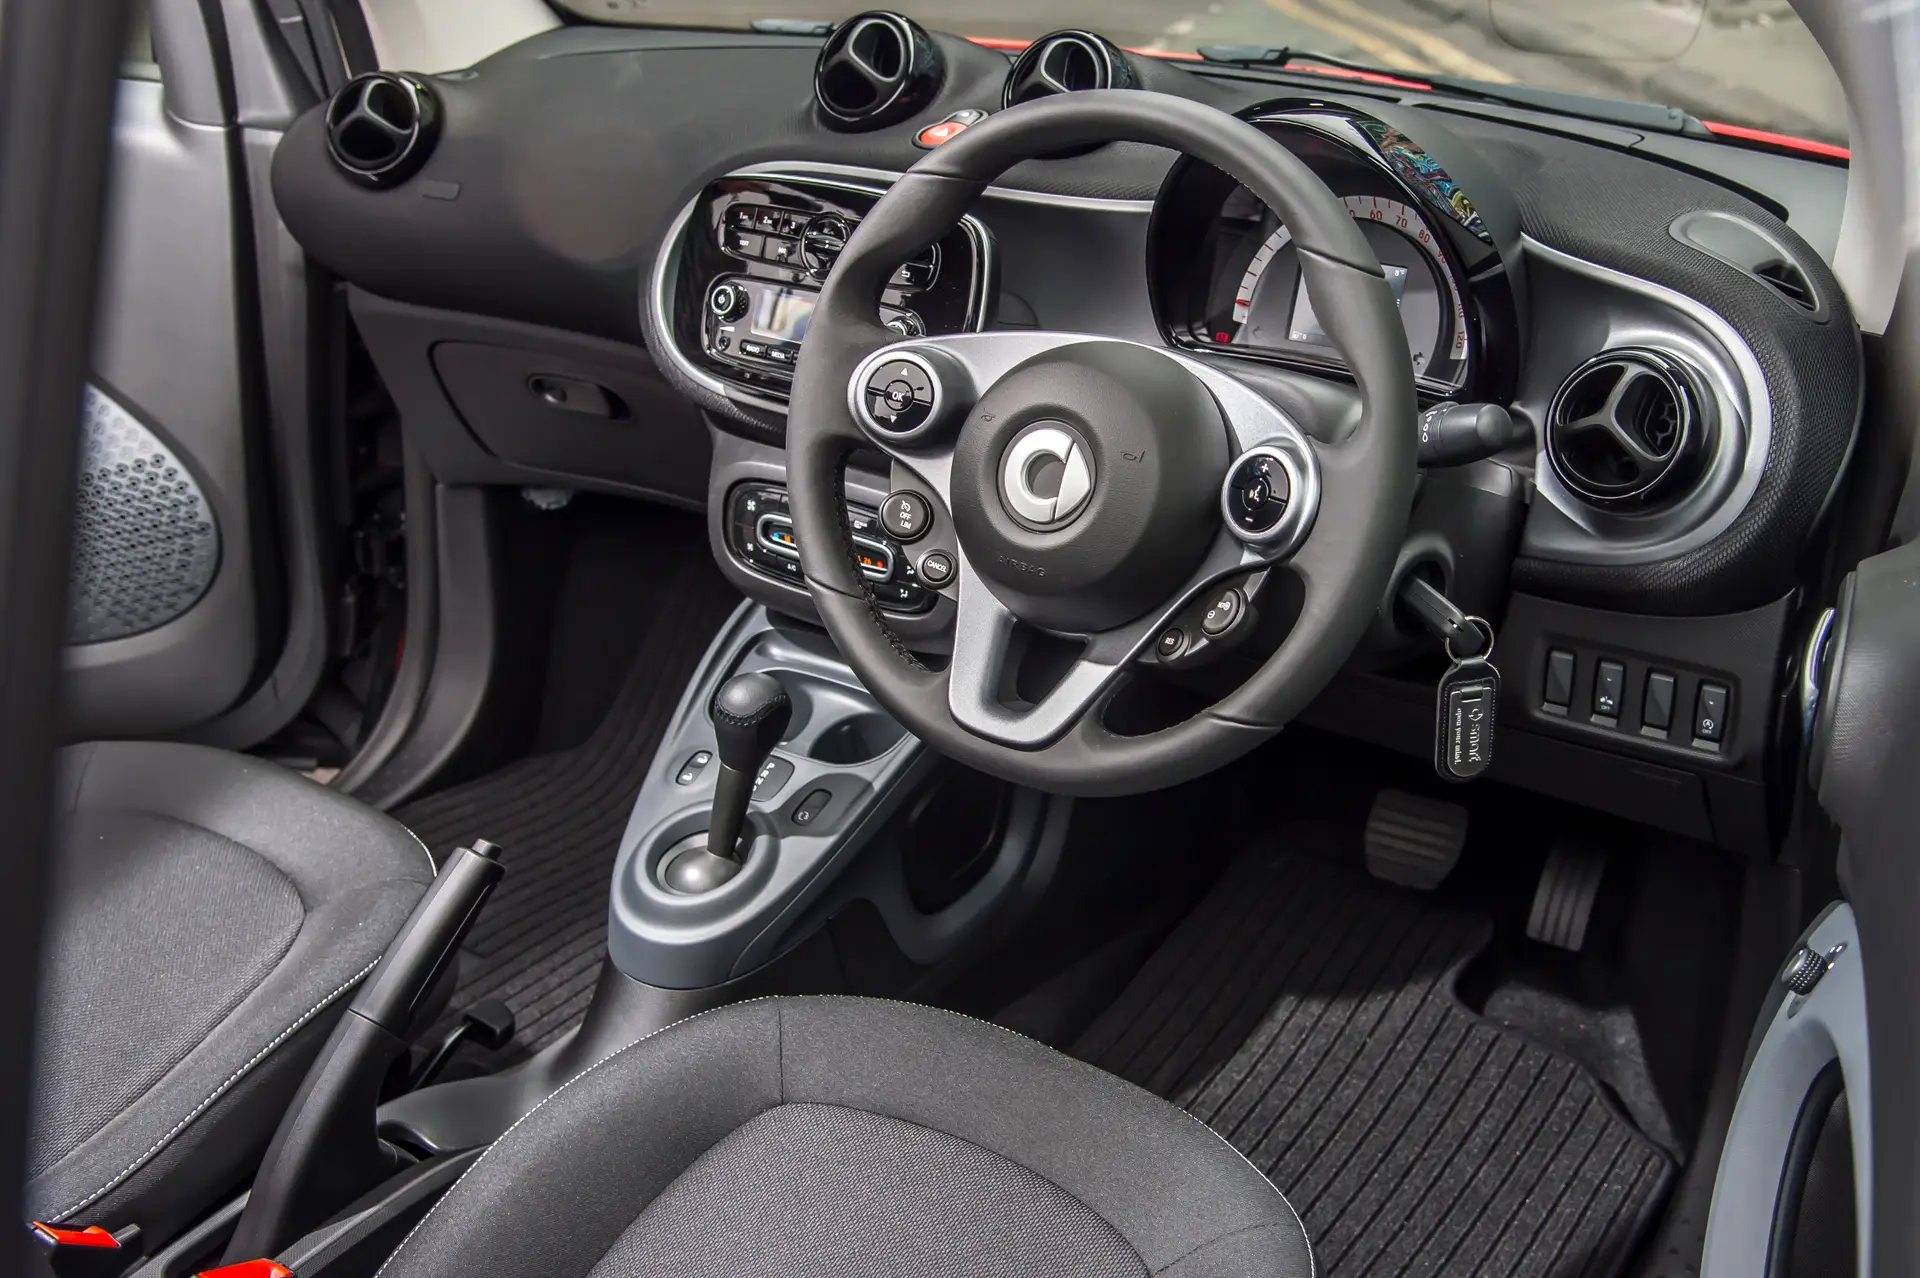 Smart Fortwo Cabriolet Driver's Seat